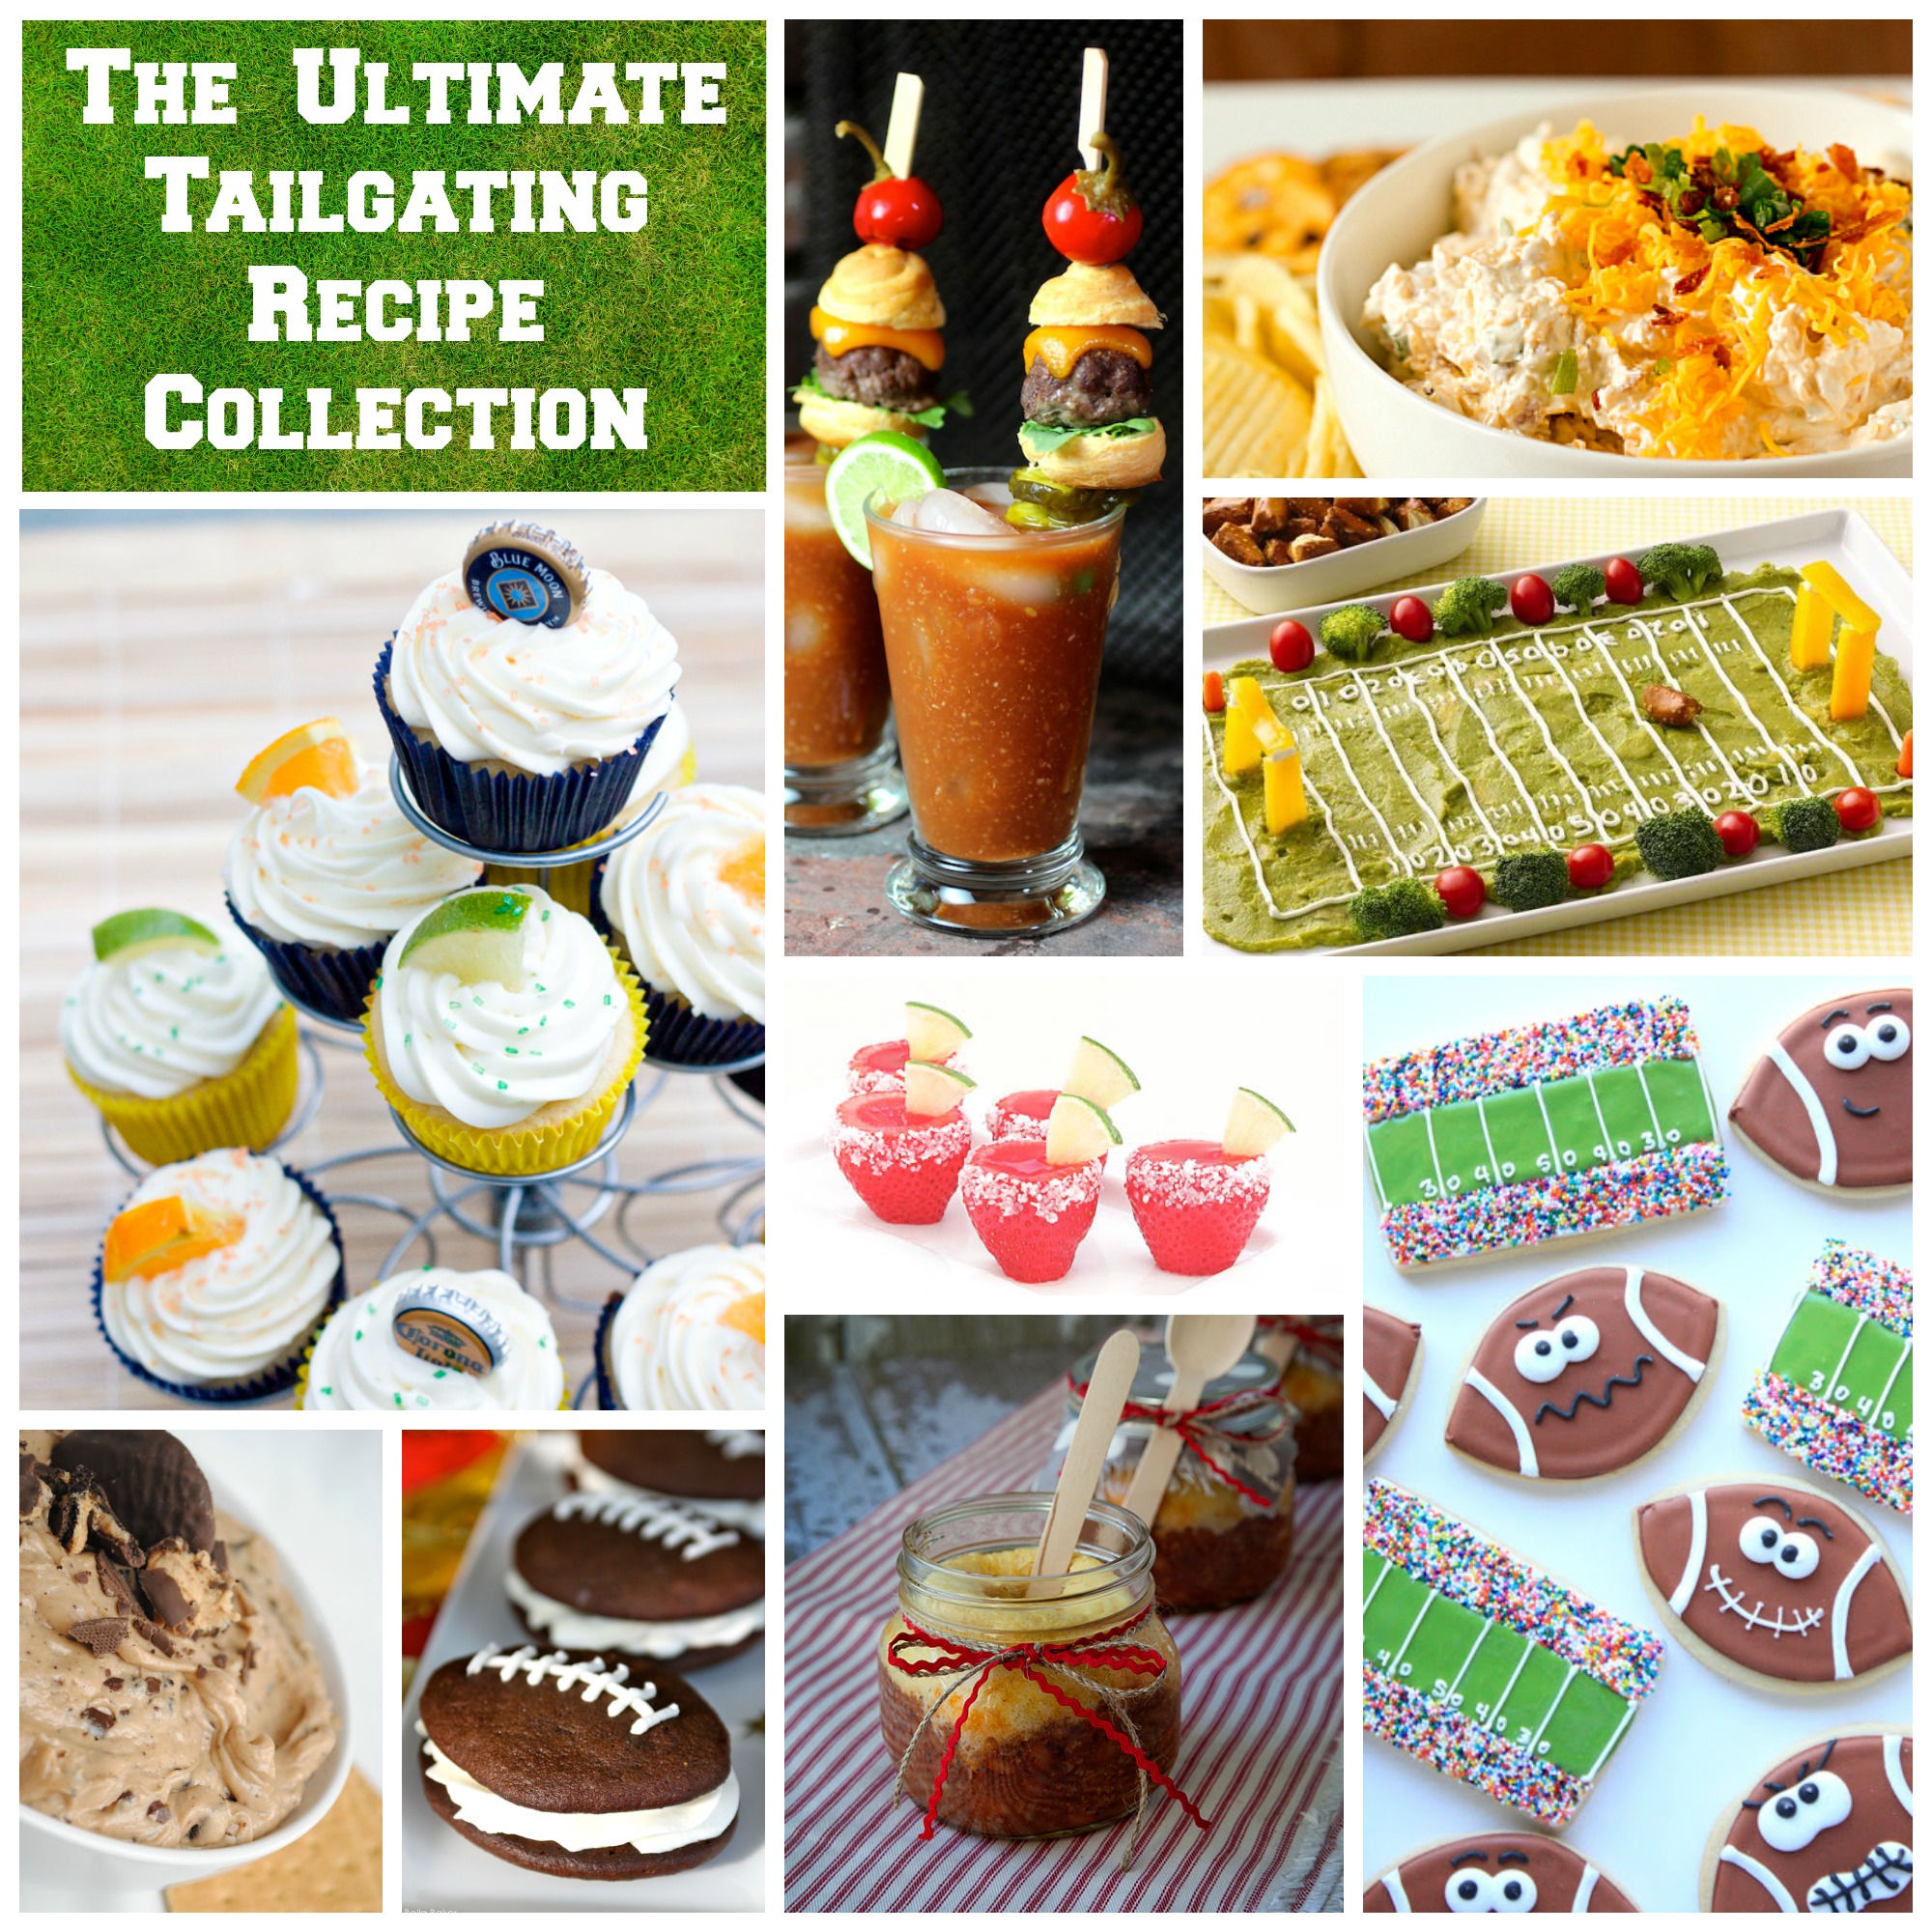 The Ultimate Tailgating Recipe Collection